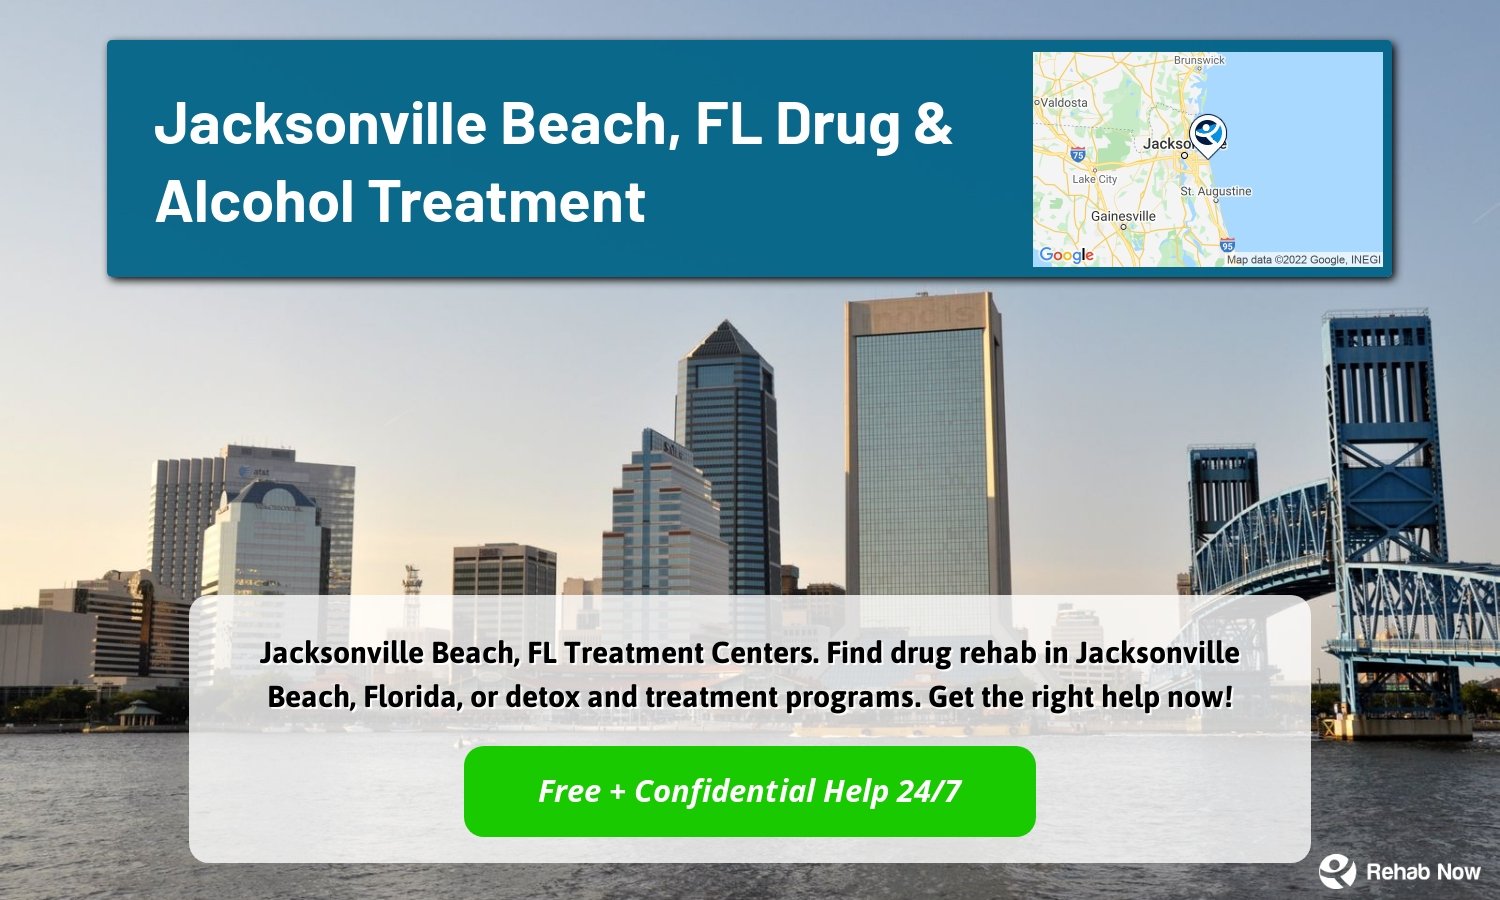 Jacksonville Beach, FL Treatment Centers. Find drug rehab in Jacksonville Beach, Florida, or detox and treatment programs. Get the right help now!